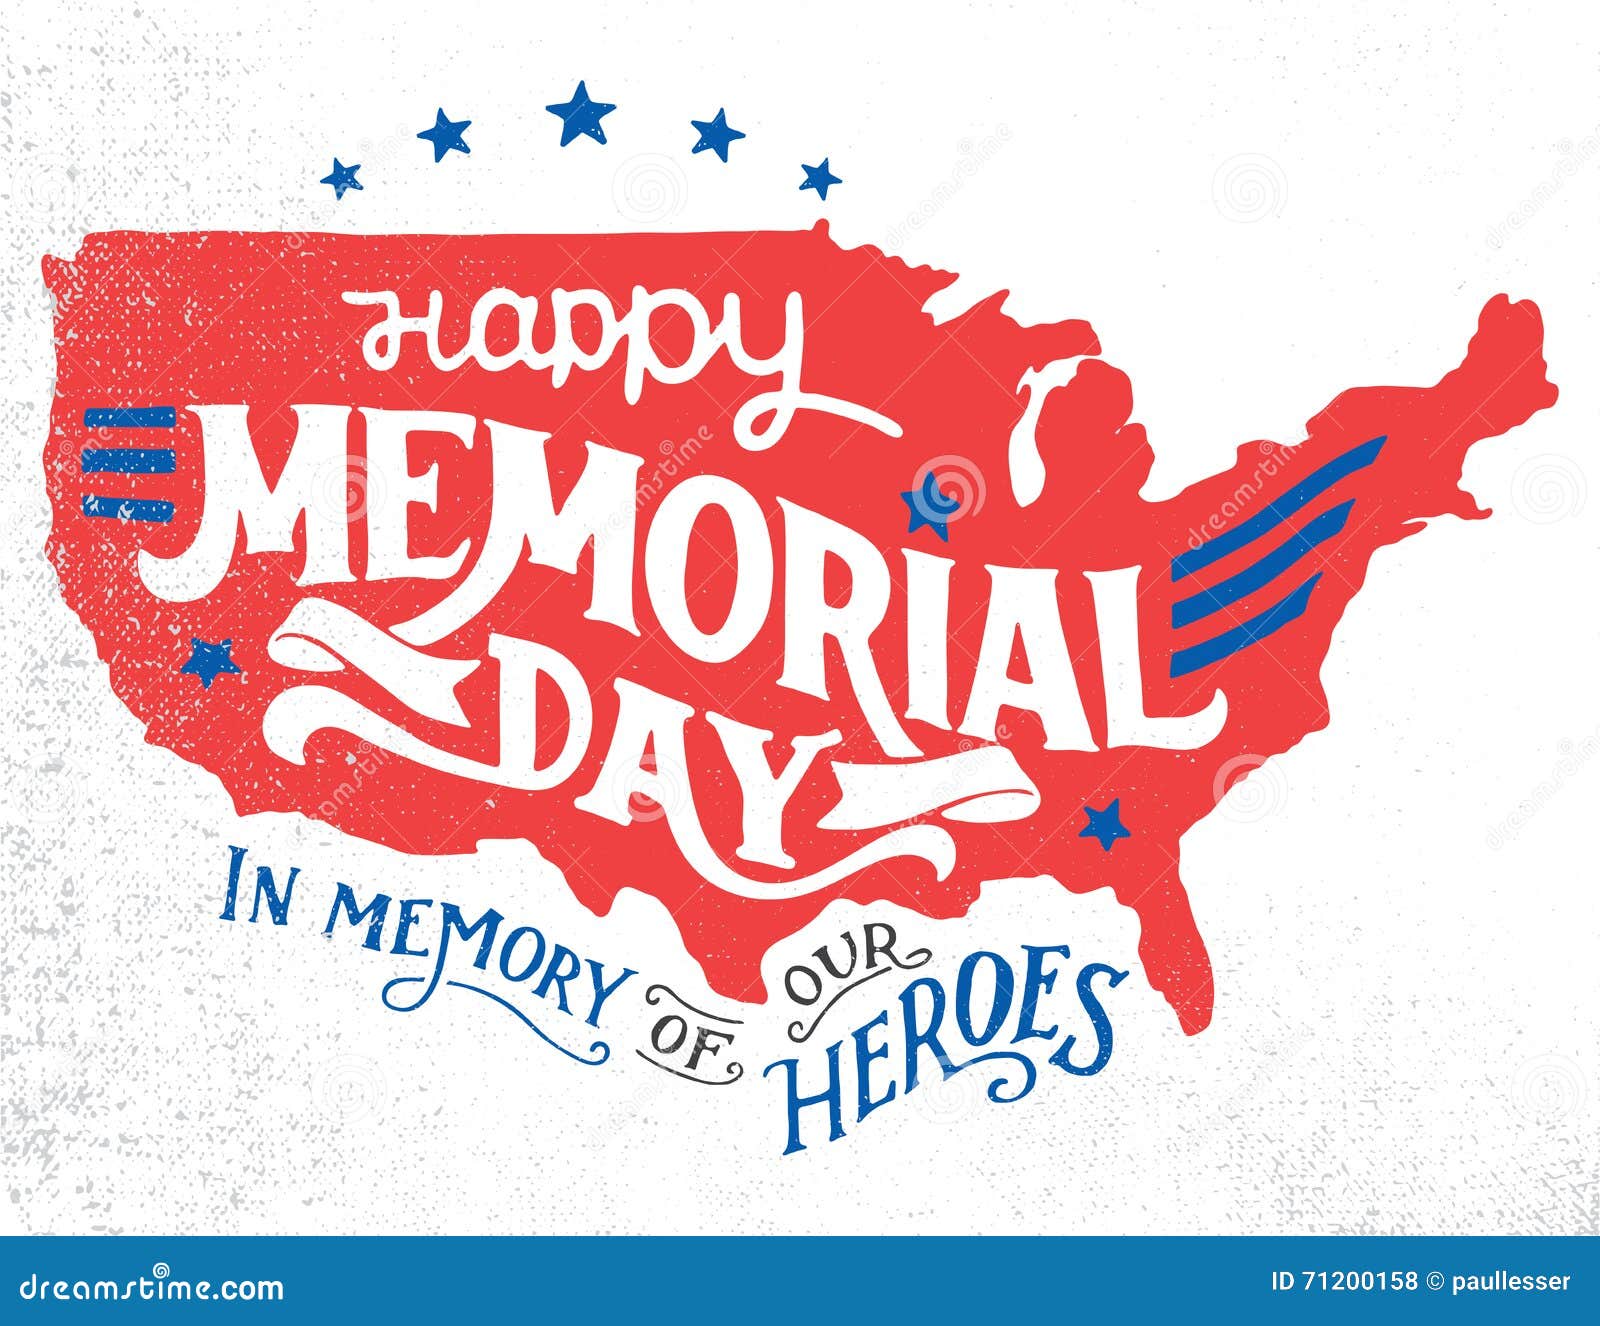 happy memorial day hand-lettering greeting card